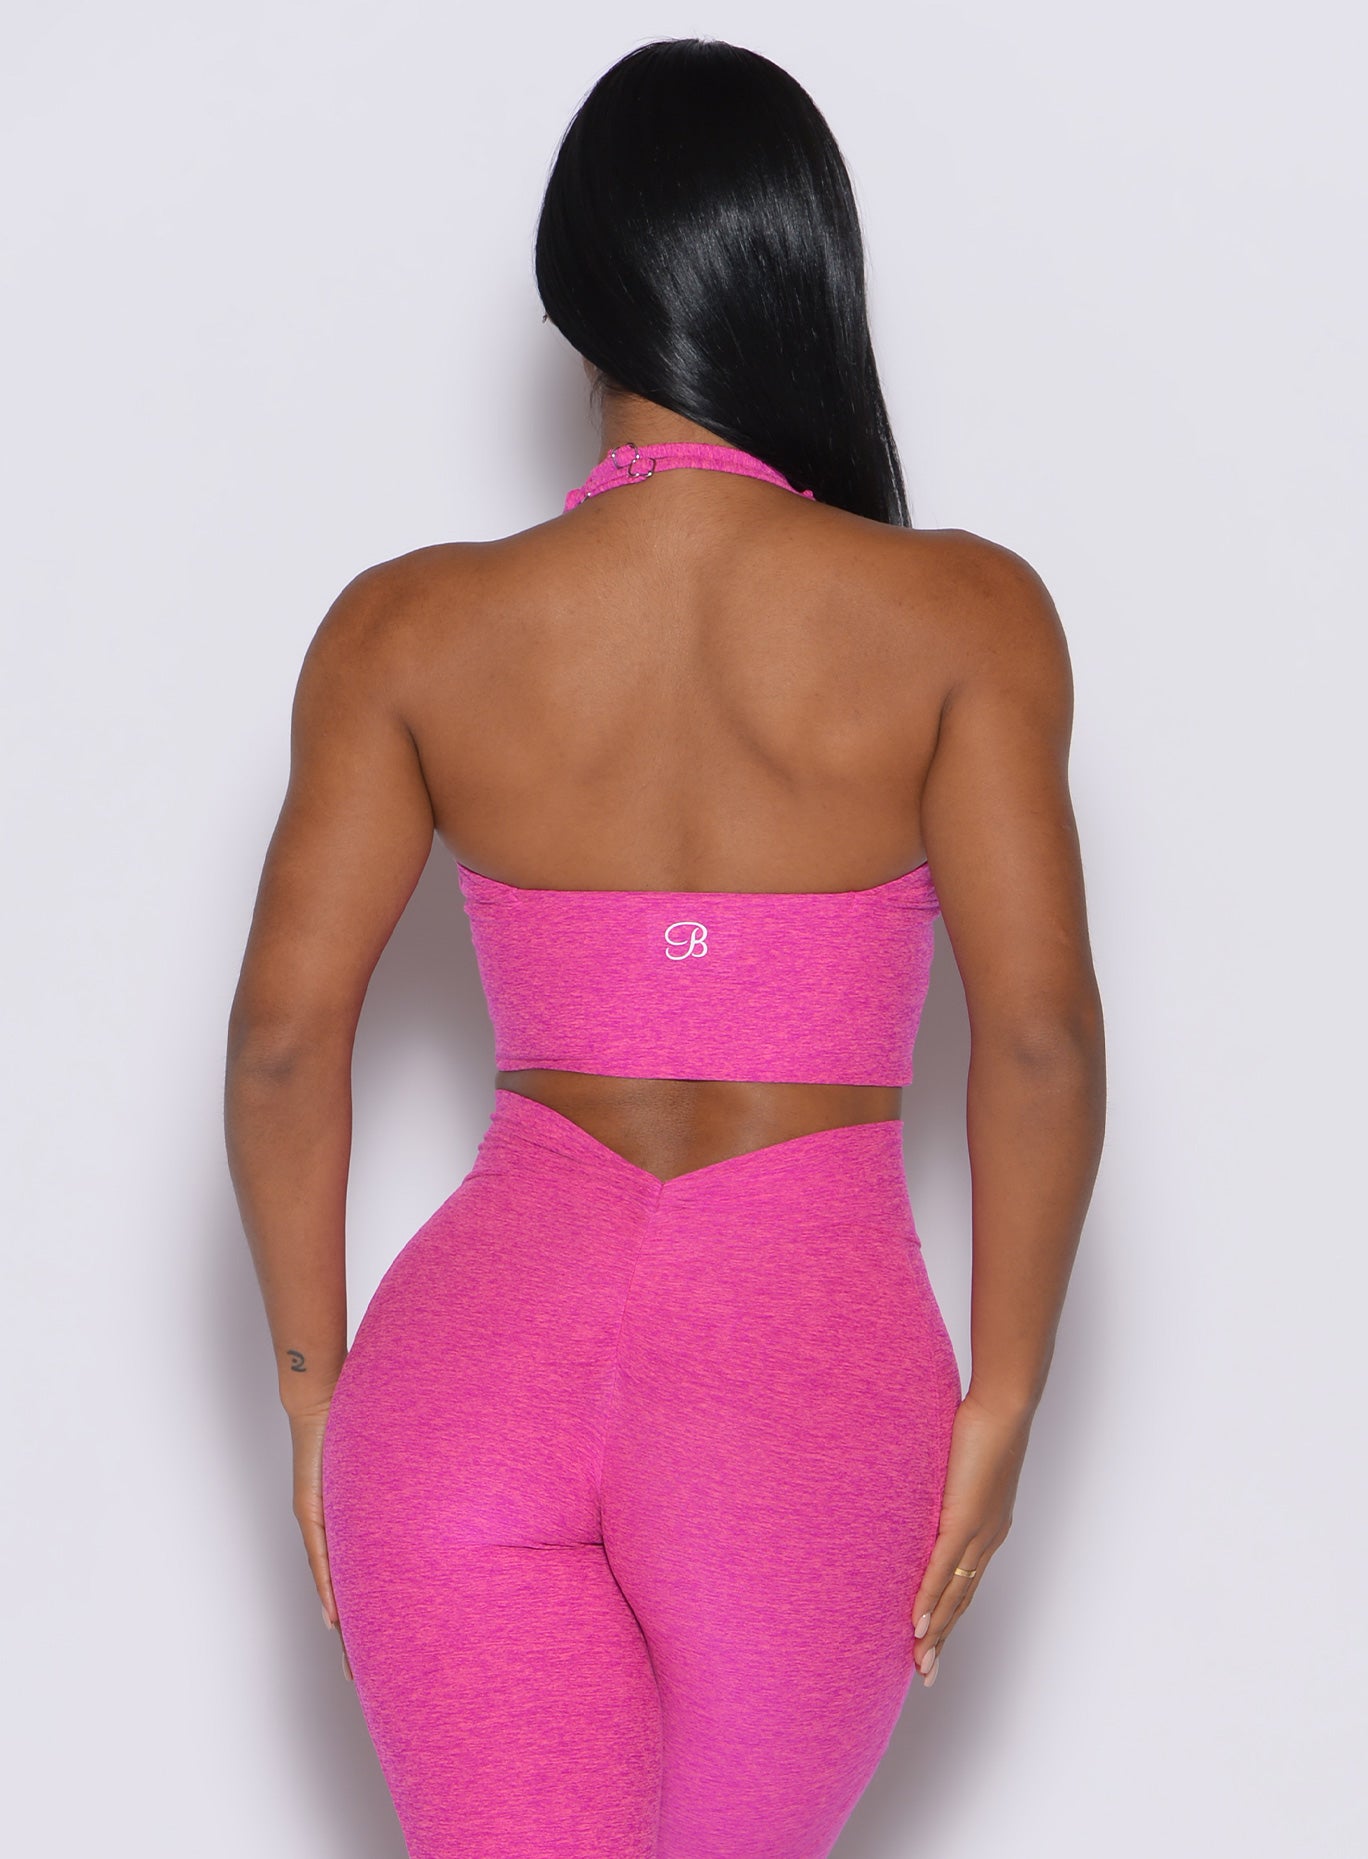 back profile picture of a model wearing our longline backless bra in Neon pink sorbet color along with a matching leggings